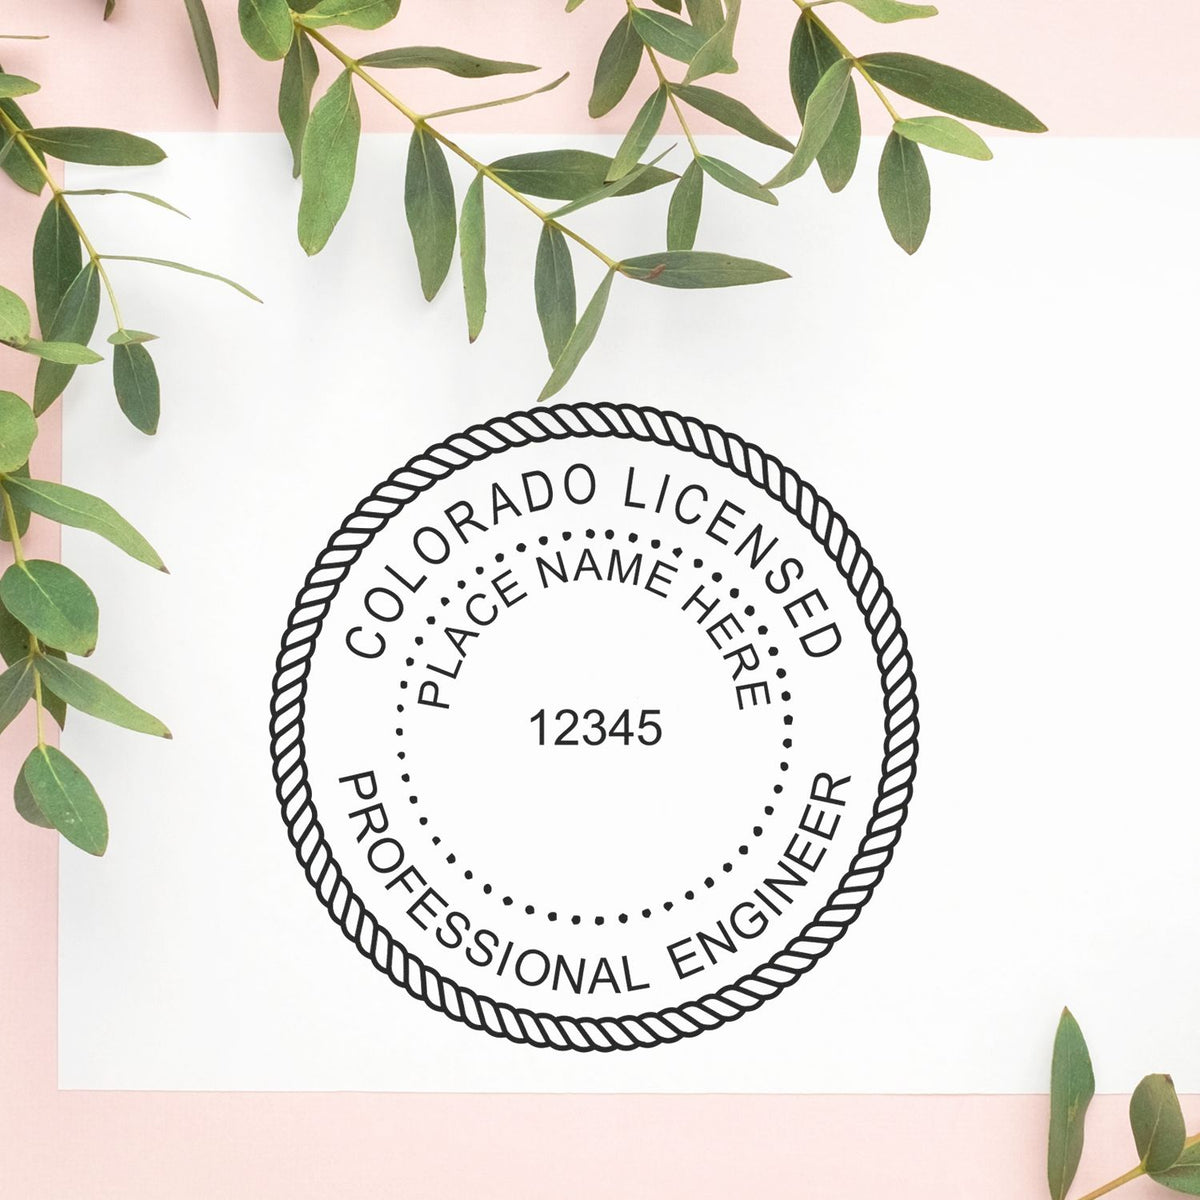 This paper is stamped with a sample imprint of the Colorado Professional Engineer Seal Stamp, signifying its quality and reliability.